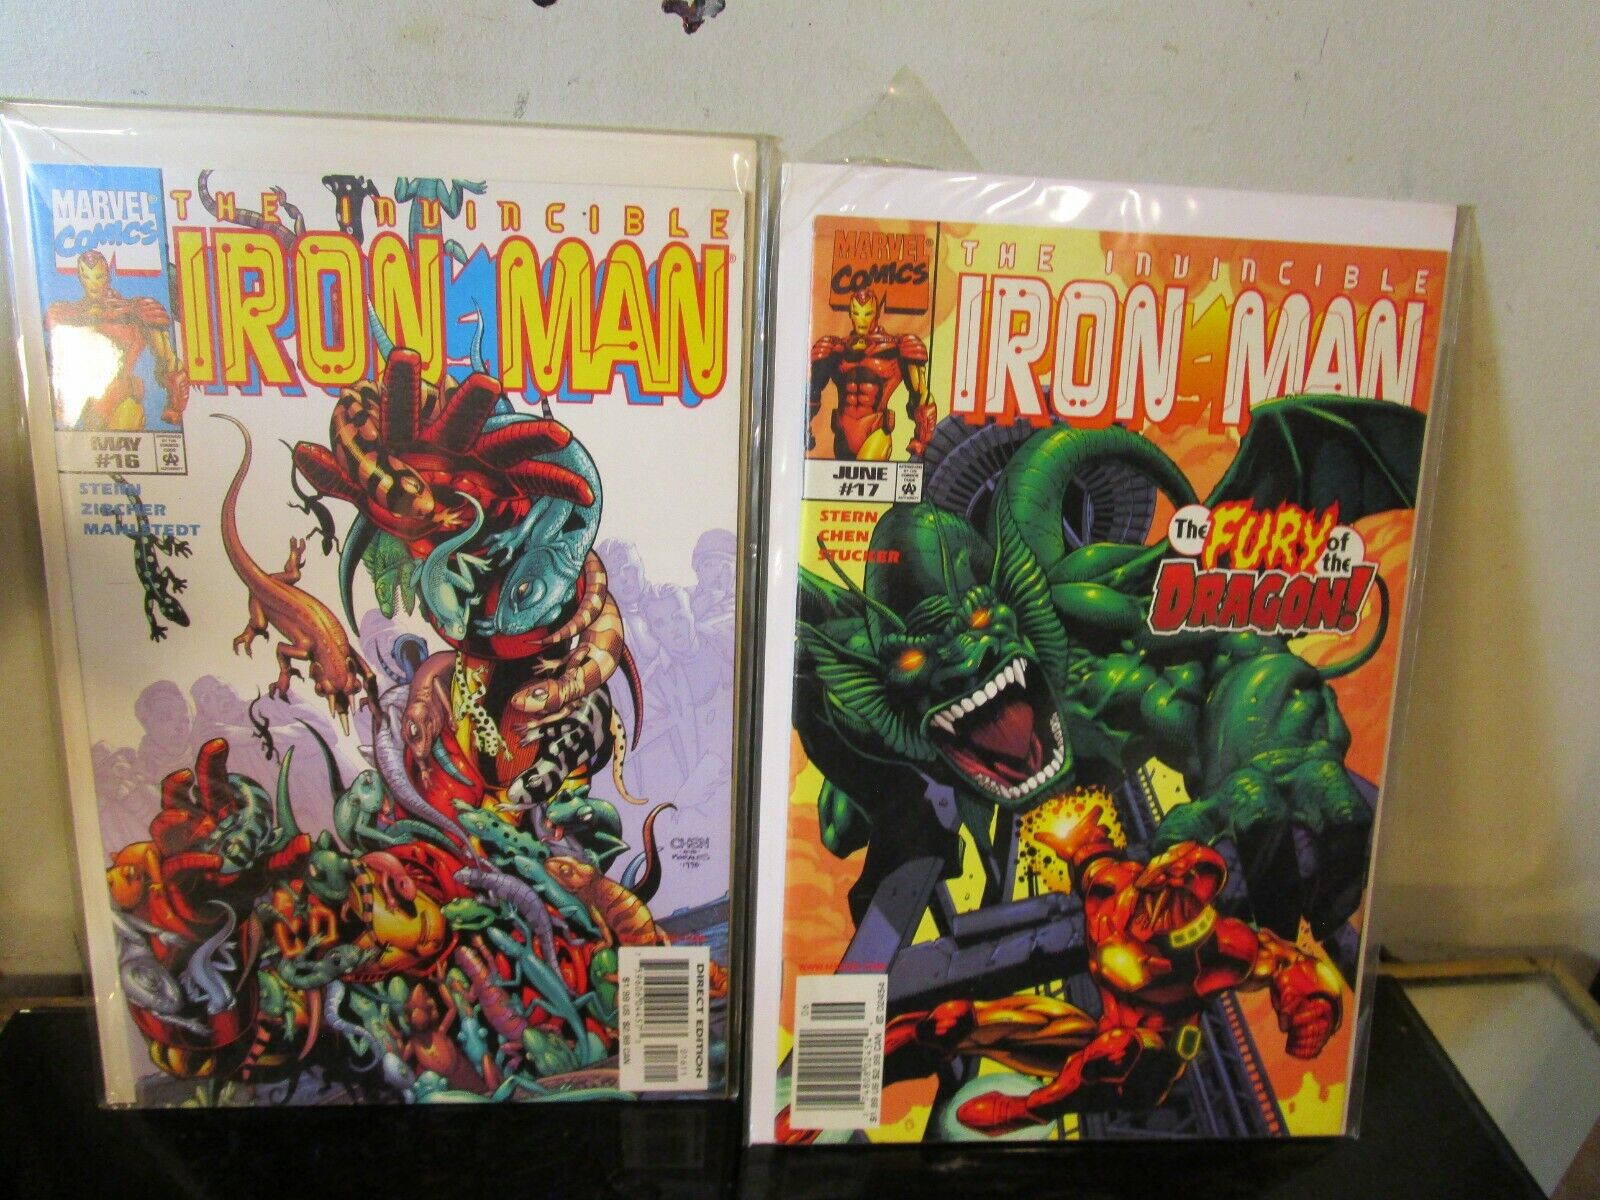 IRON-MAN #16 -17 LOT  VOL. 3 THE INVINCIBLE MARVEL MONSTERS: FIN FANG FOOM BAGGE